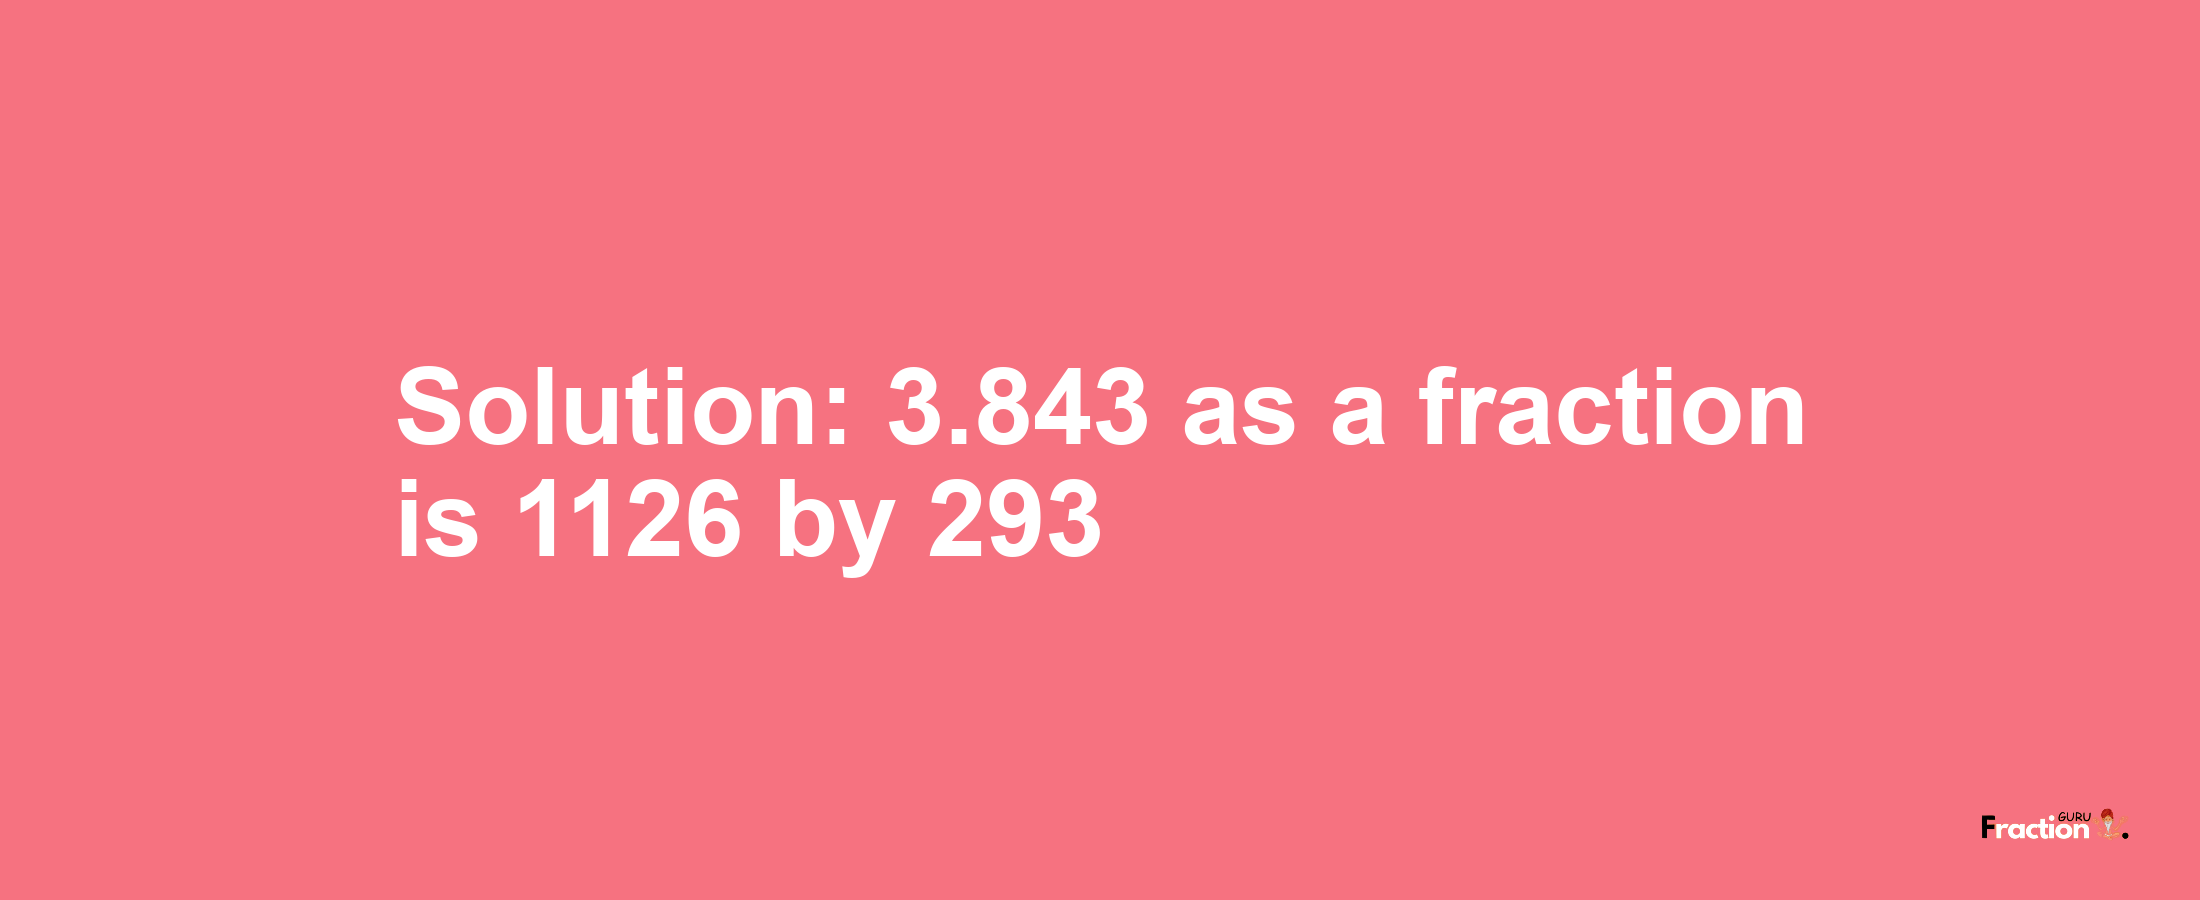 Solution:3.843 as a fraction is 1126/293